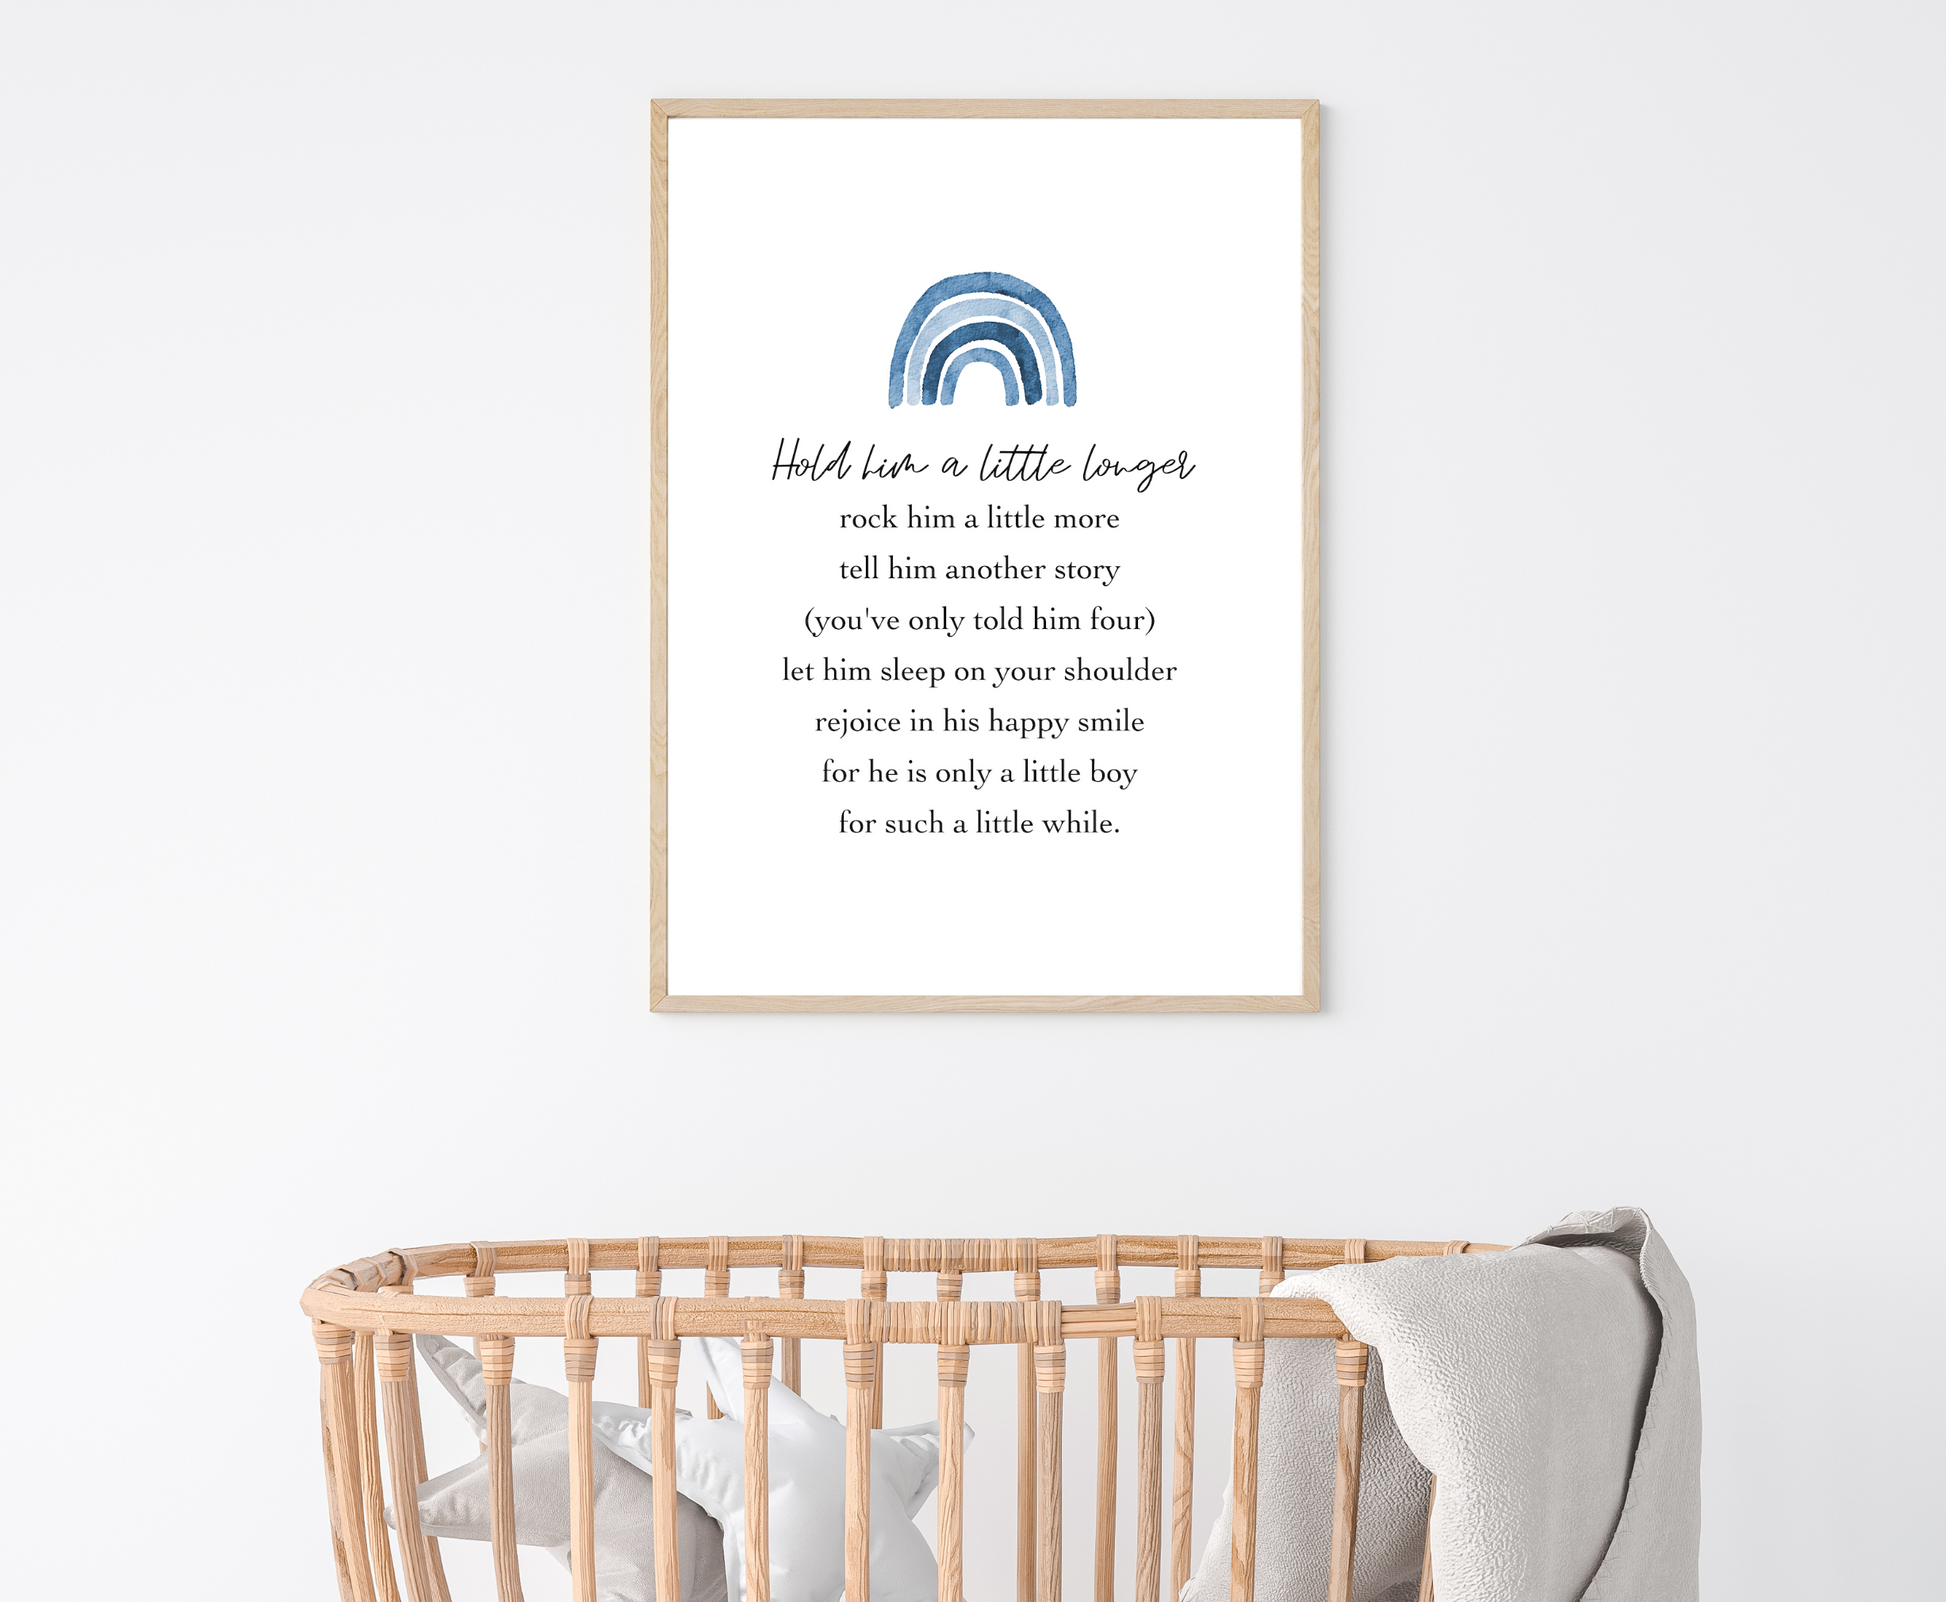 A digital print is hung above a baby’s cradle. The digital print has a blue rainbow at the top and a piece of writing that says: Hold him a little longer, rock him a little more, tell him another story, (you have only told him four), let him sleep on your shoulder, rejoice in his happy smile, for he is only a little boy, for such a little while.